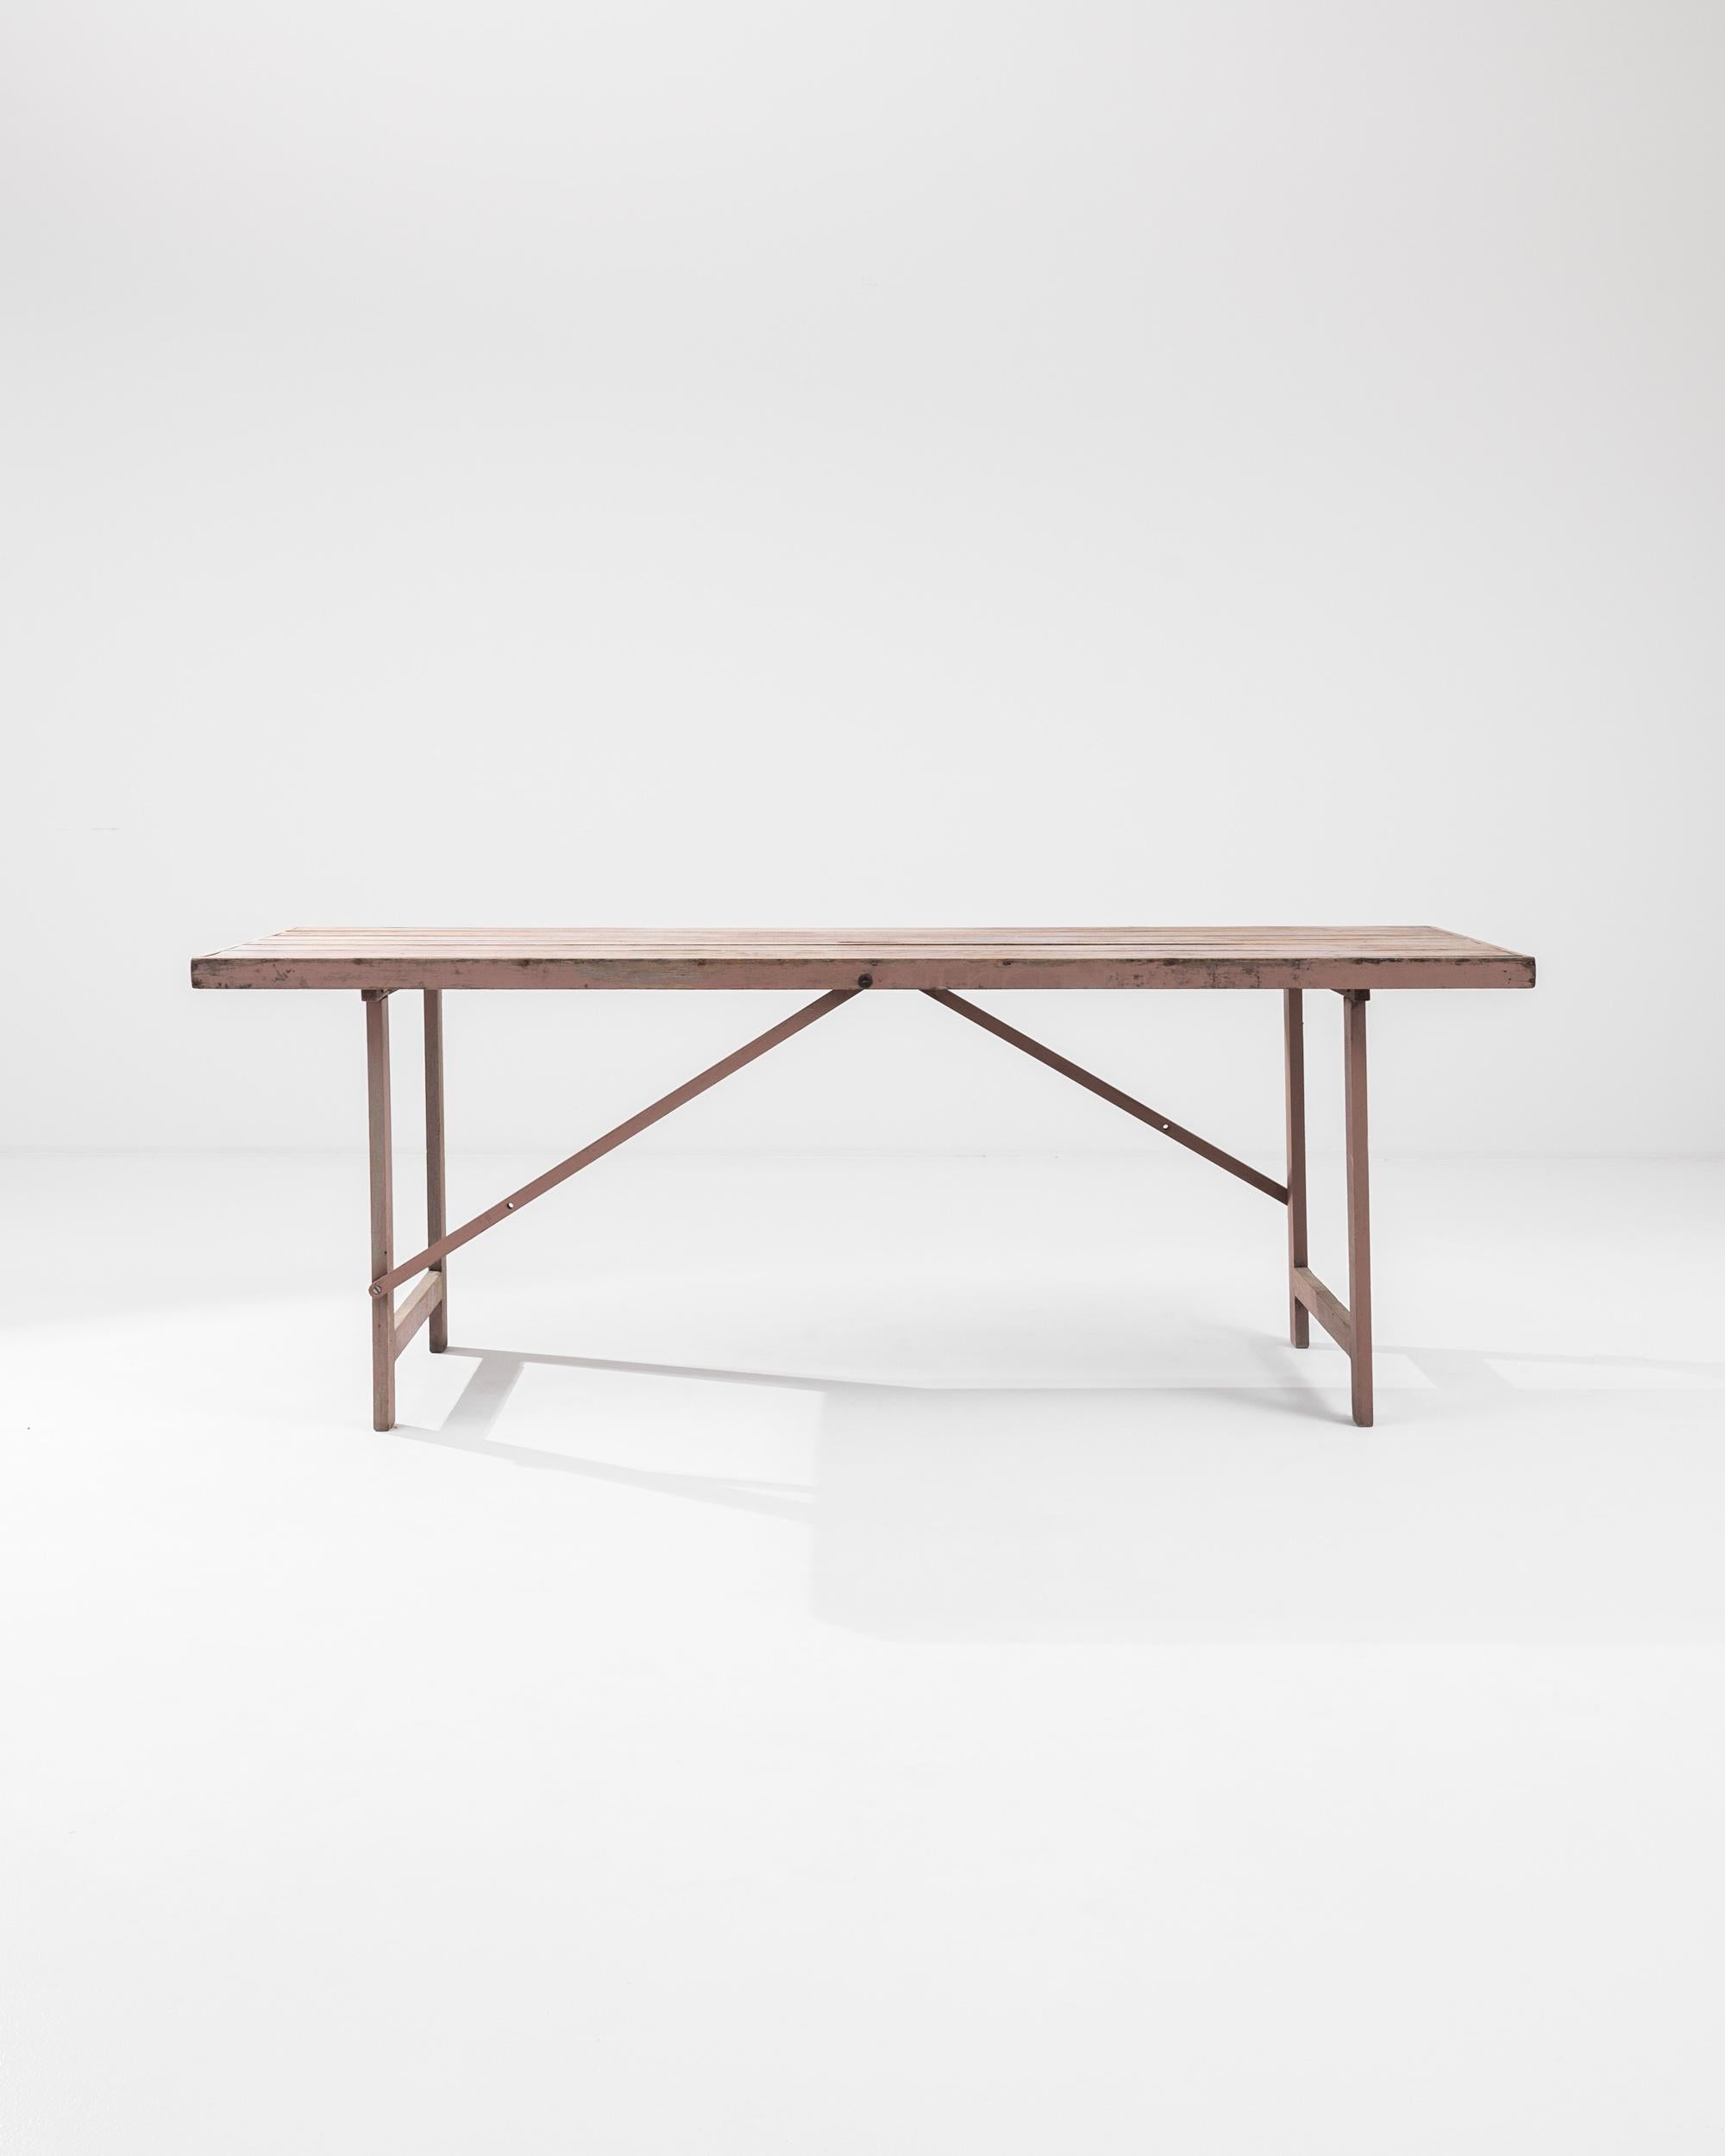 Rustic 20th Century Belgian Wooden Table For Sale